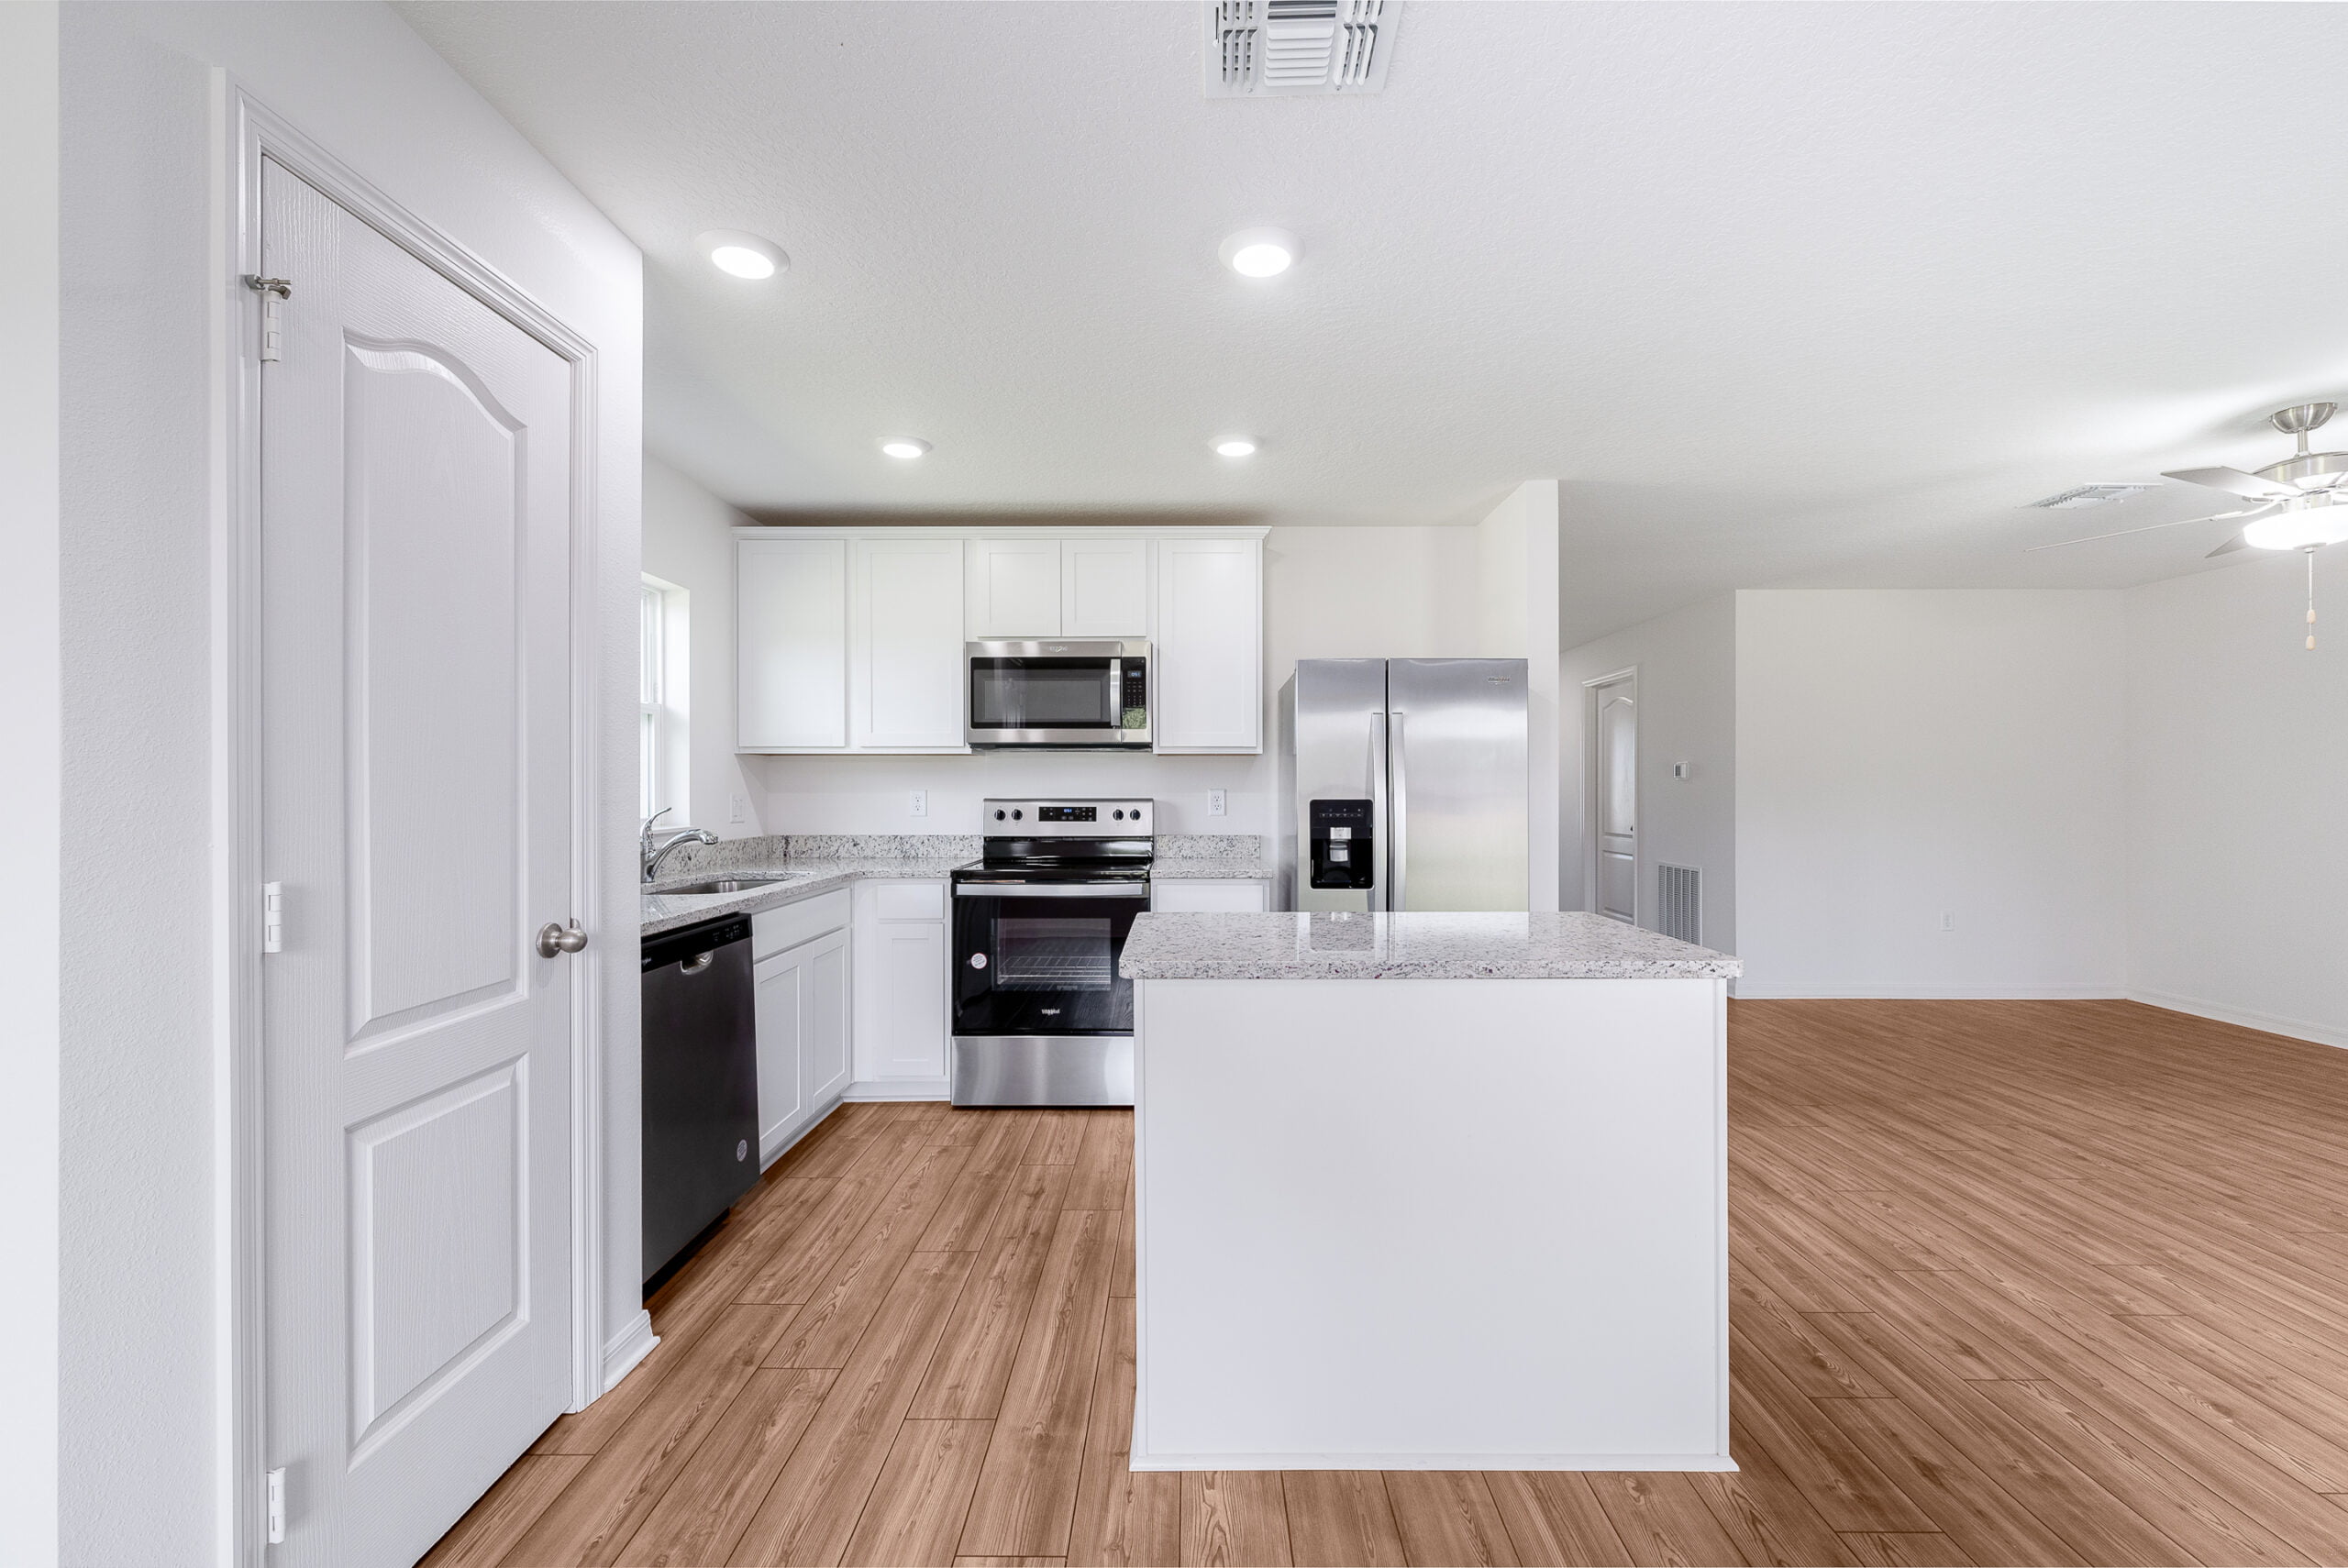 This photo shows a bright, modern kitchen with white cabinetry, stainless steel appliances, and a central island. The space opens into a larger room with wooden flooring and a white ceiling with recessed lighting, conveying a clean, open-plan living area.